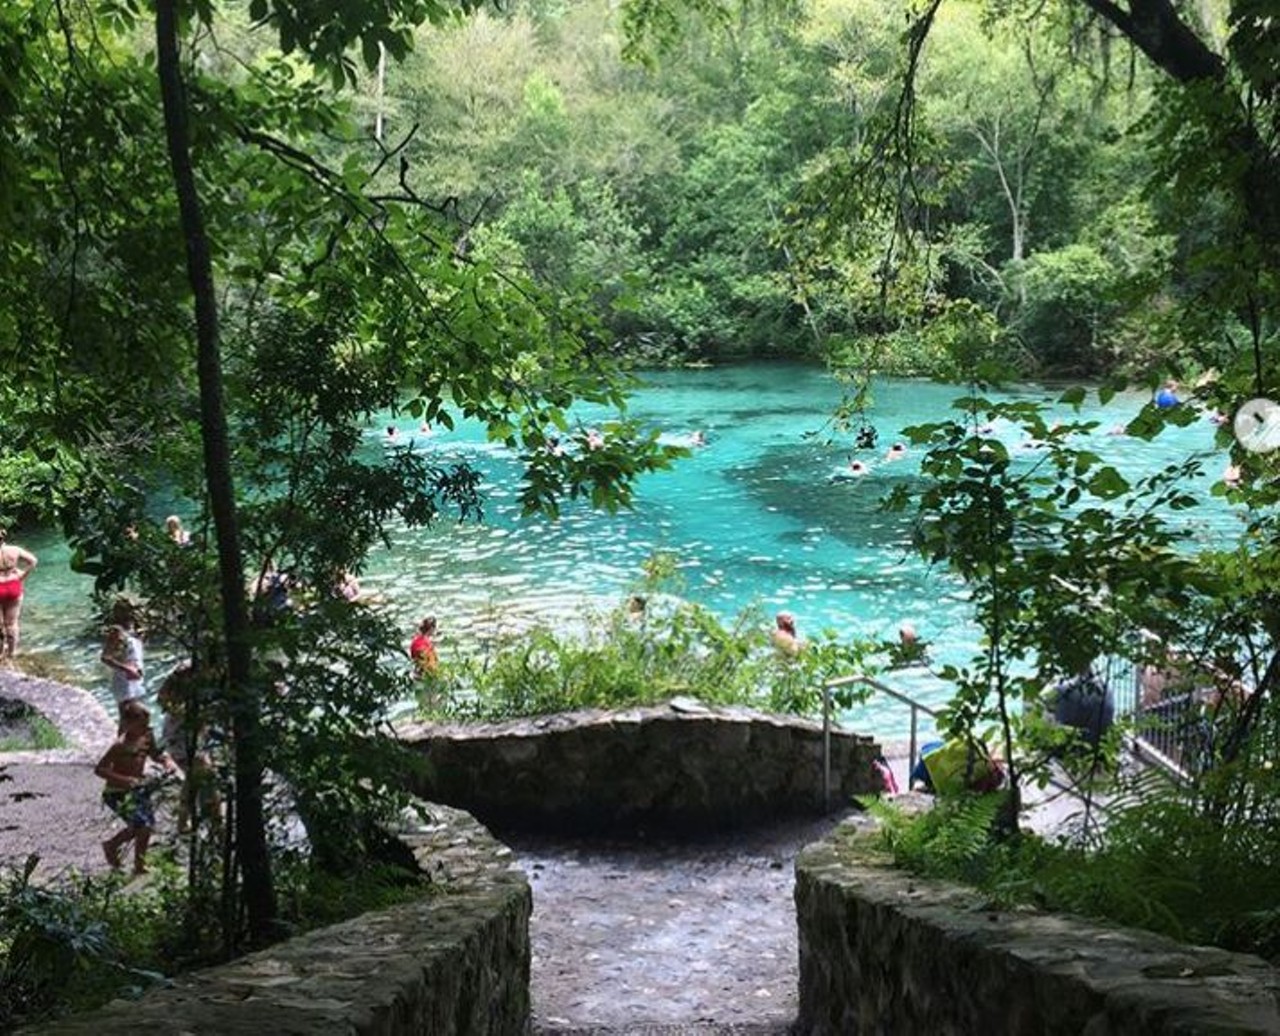 Ichetucknee Springs State Park
Estimated driving distance: 2 hours, 15 minutes
This spring is more than two hours away from Orlando, but boy is it worth the drive. Tube down this serene lazy river or go scuba diving in the caves of nearby Blue Hole Spring.
12087 S.W. U.S. Highway 27, Fort White
Photo via scottmpeck/Instagram